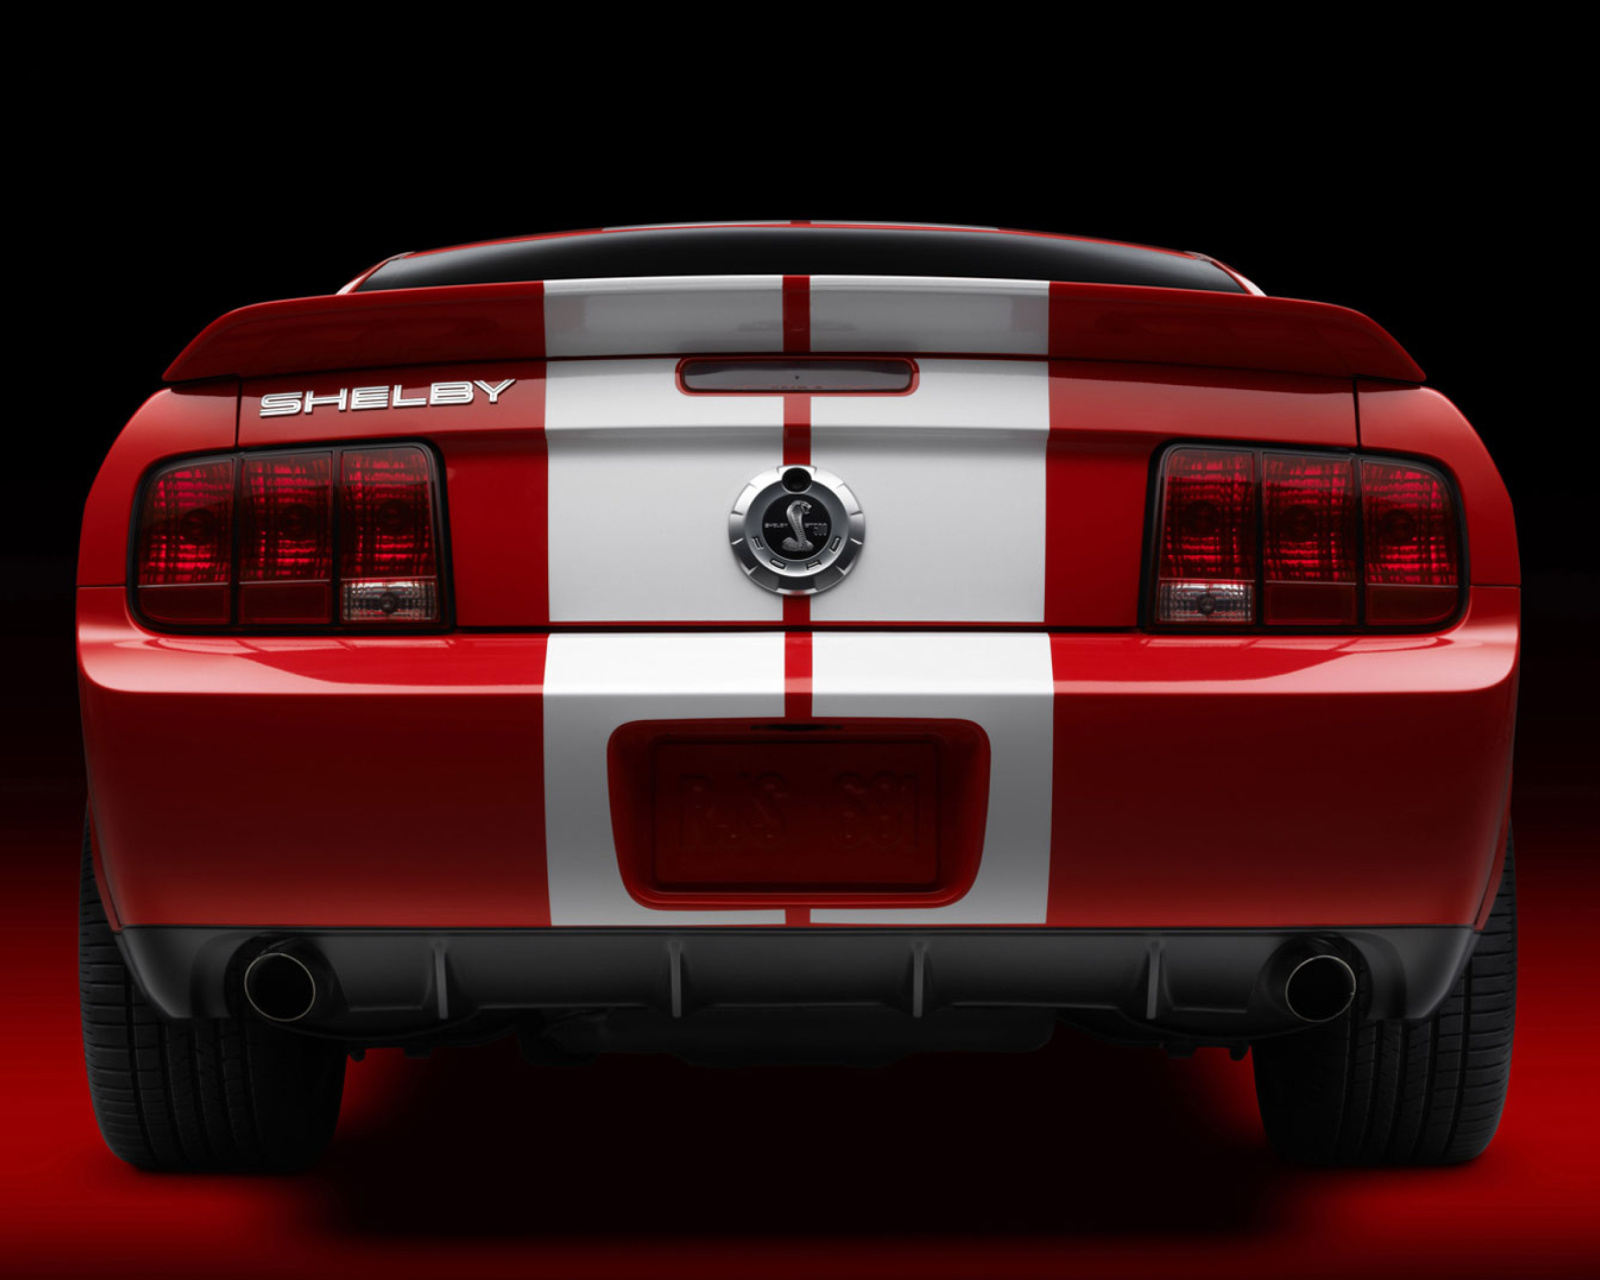 Ford Mustang Shelby GT500 wallpaper 1600x1280